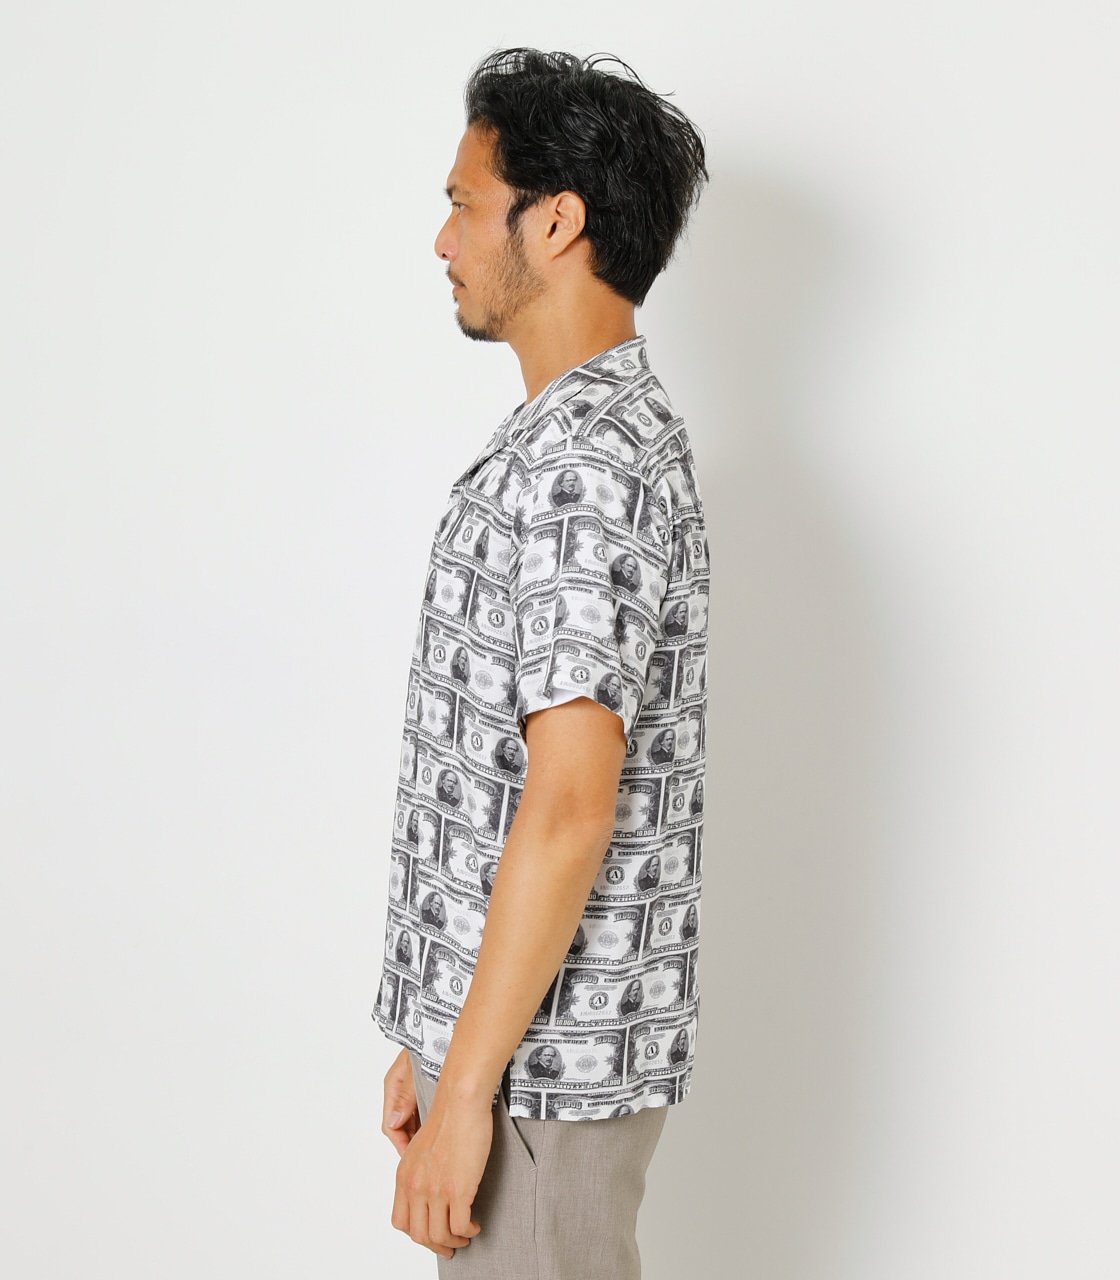 WHO IS IT ALOHA SHIRT/フーイズイットアロハシャツ 詳細画像 柄BLK 5